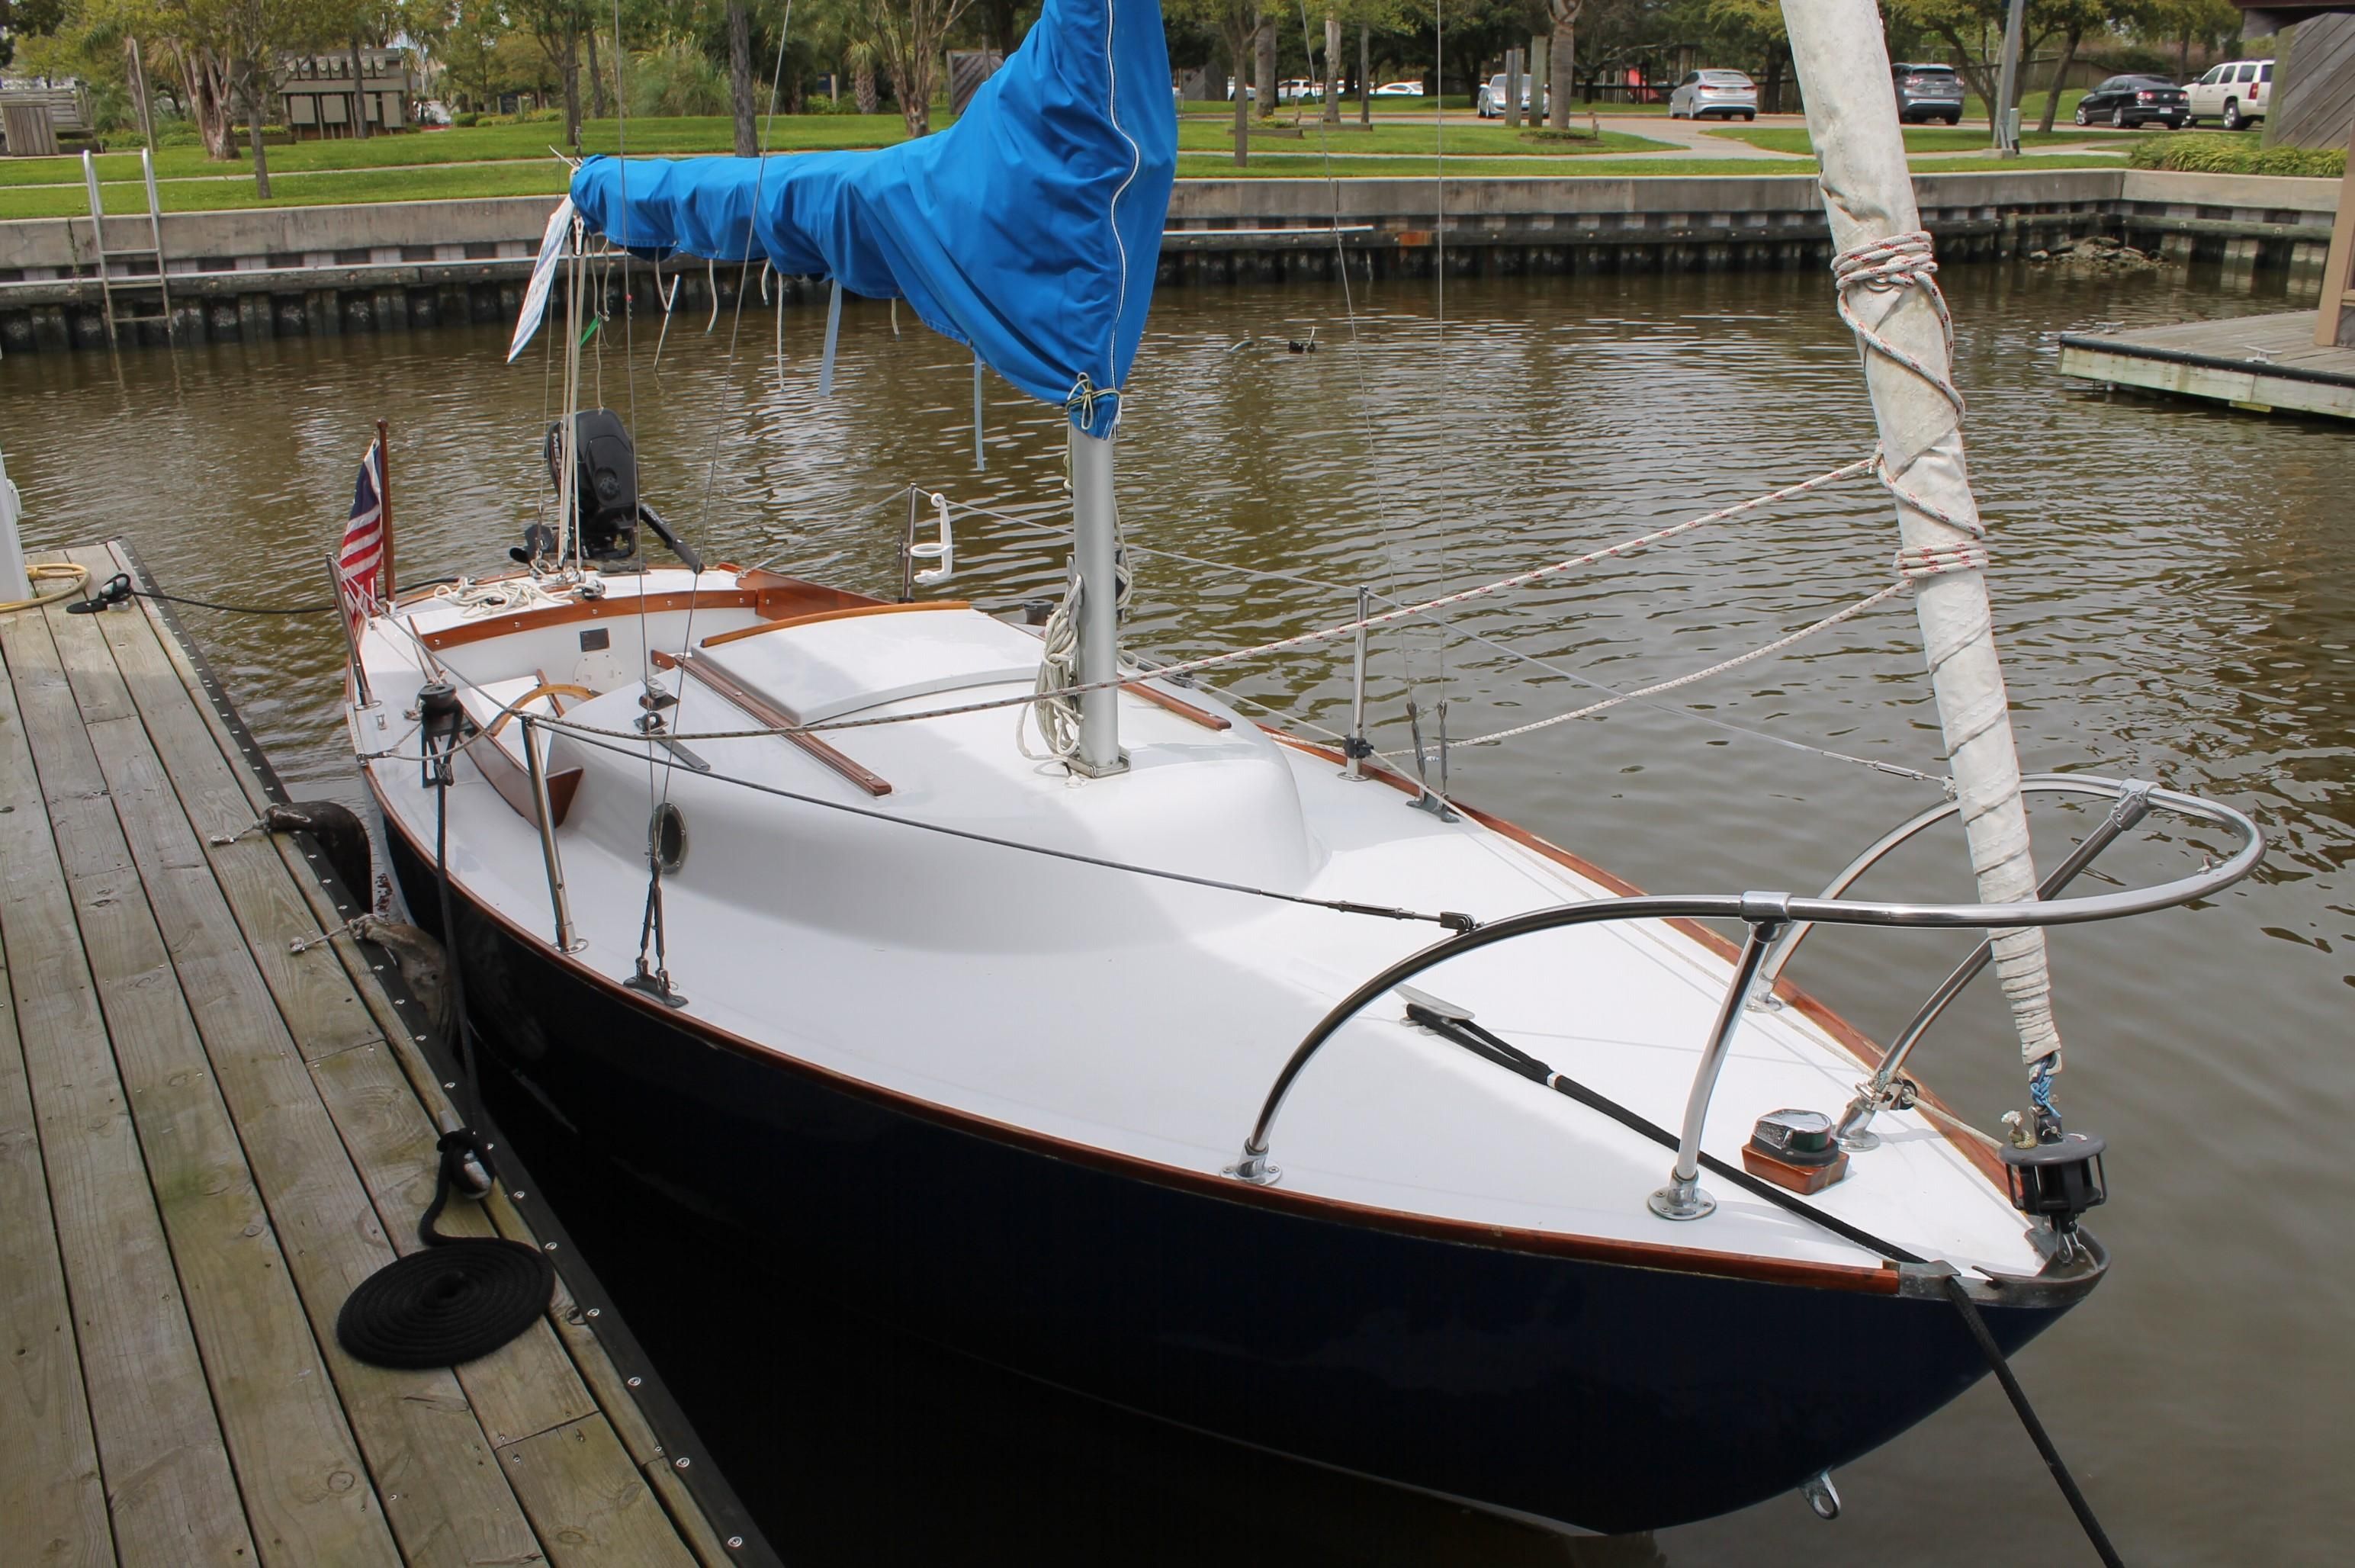 1971 cape dory typhoon restored sail boat for sale - www